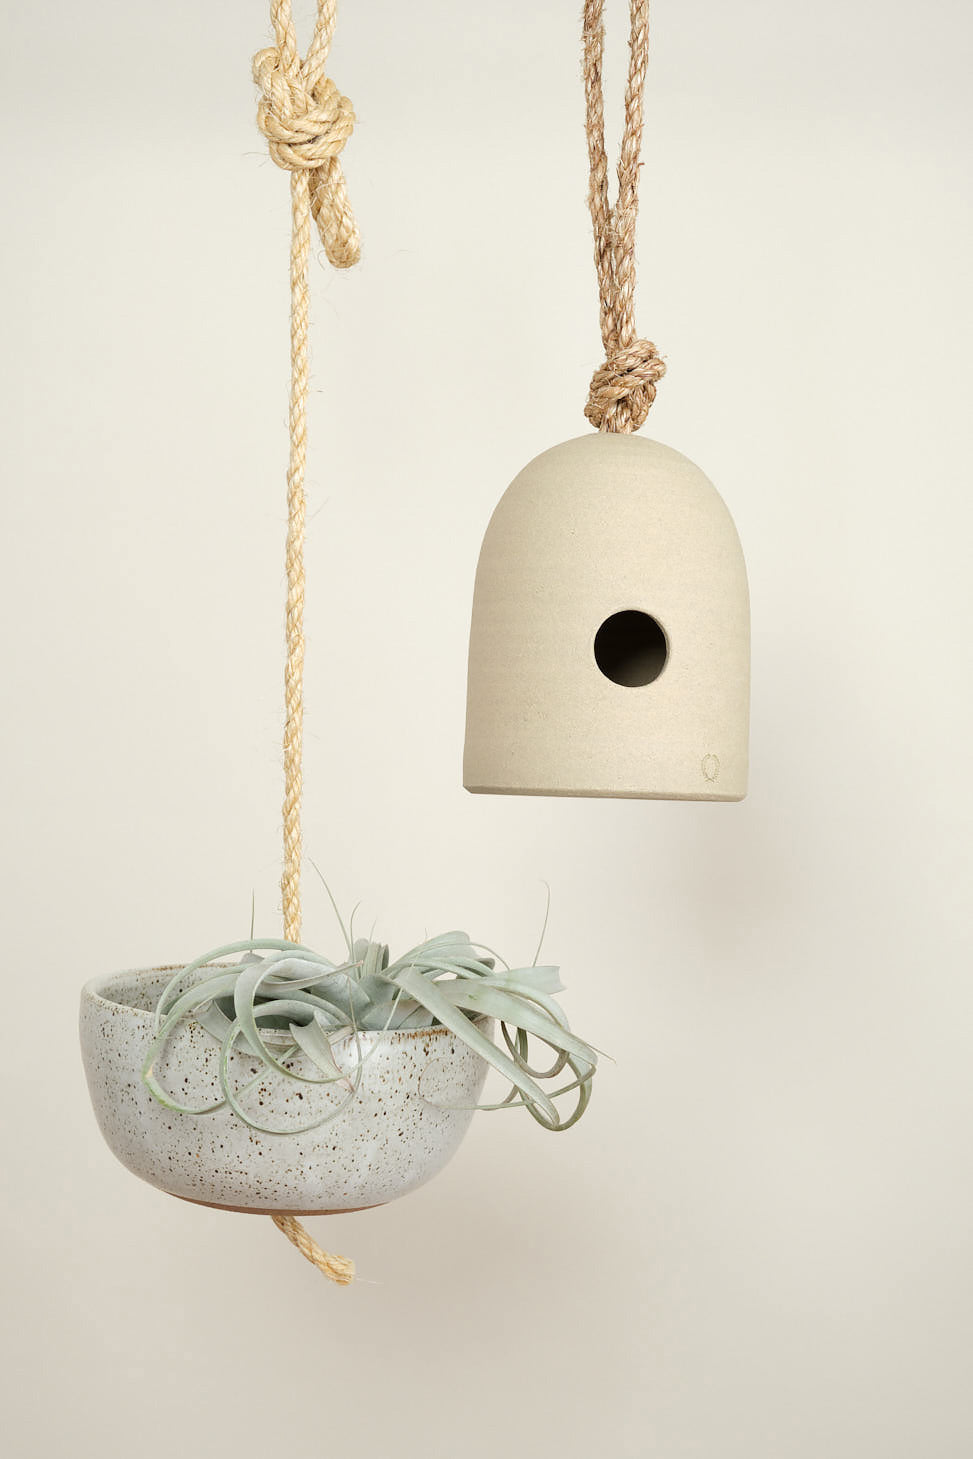 Hanging Planter with bird shelter